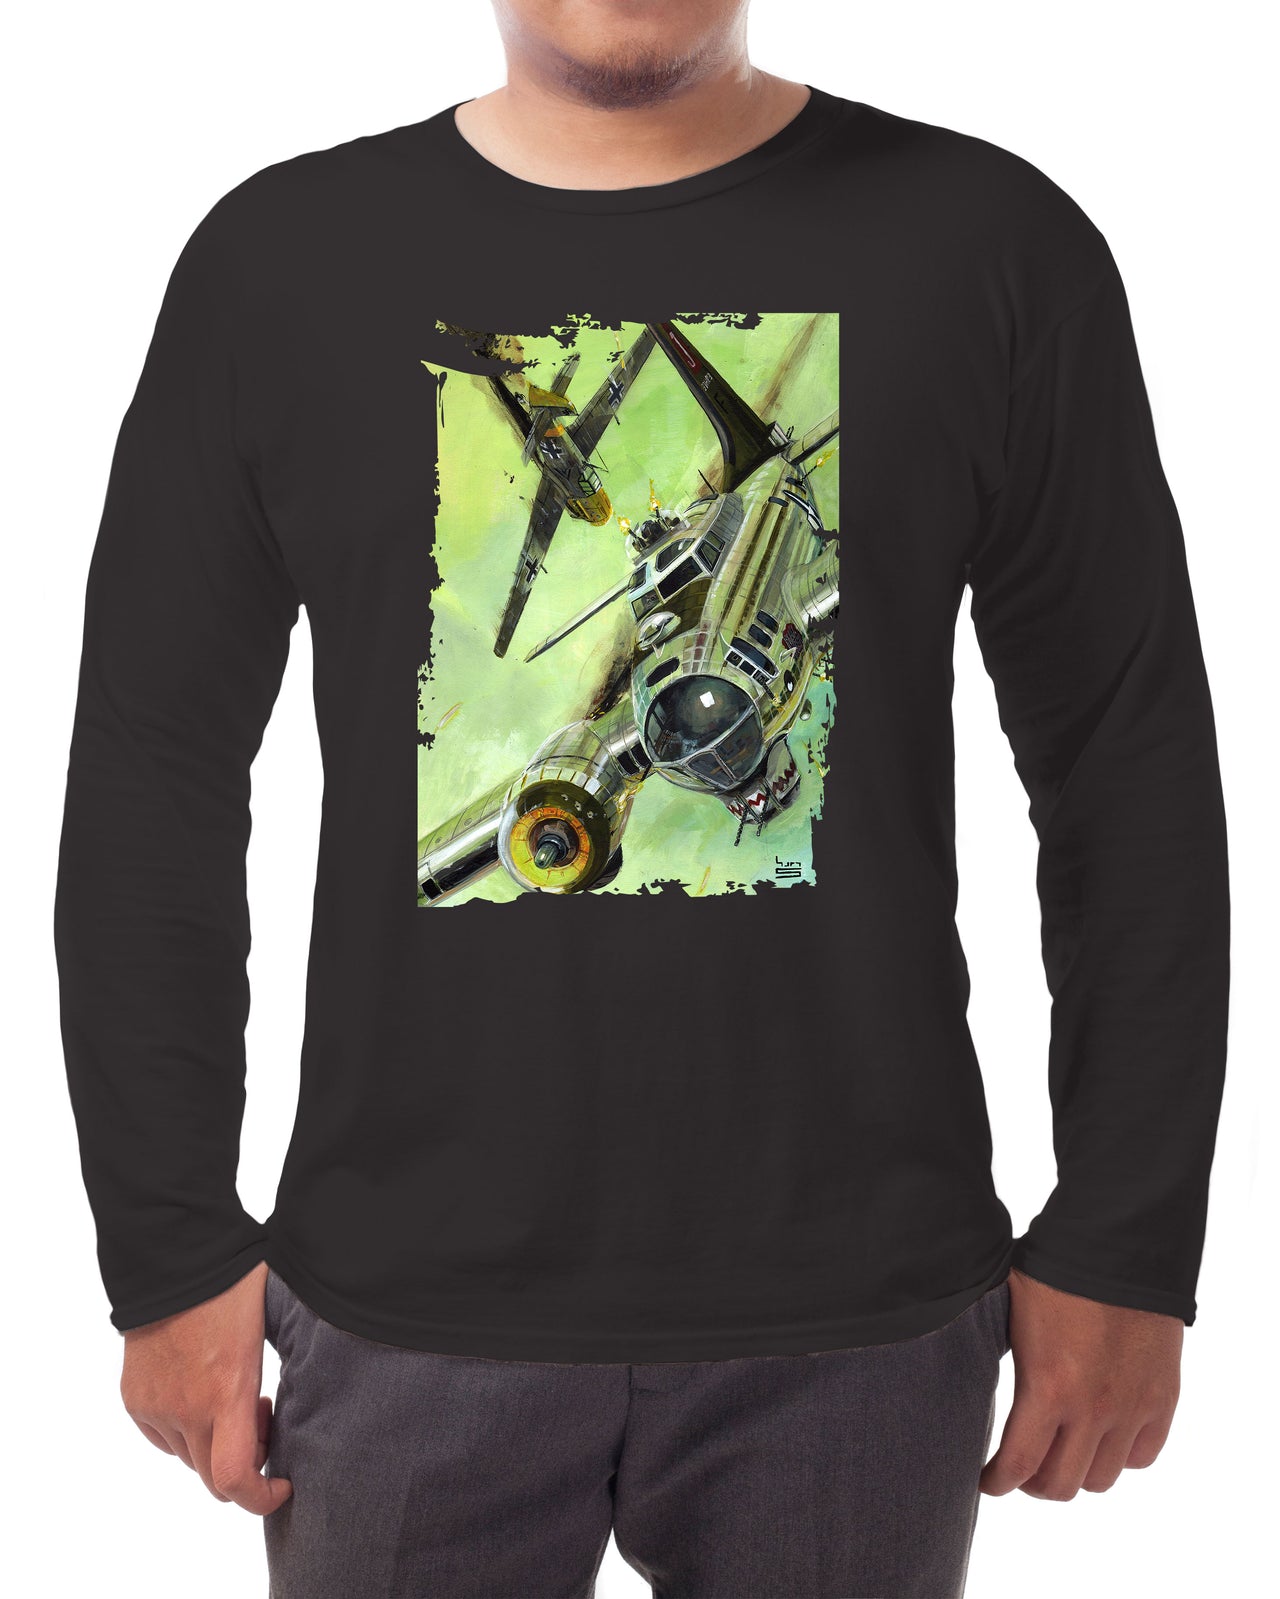 B-17 - 'One more closer to home' - Long-sleeve T-shirt